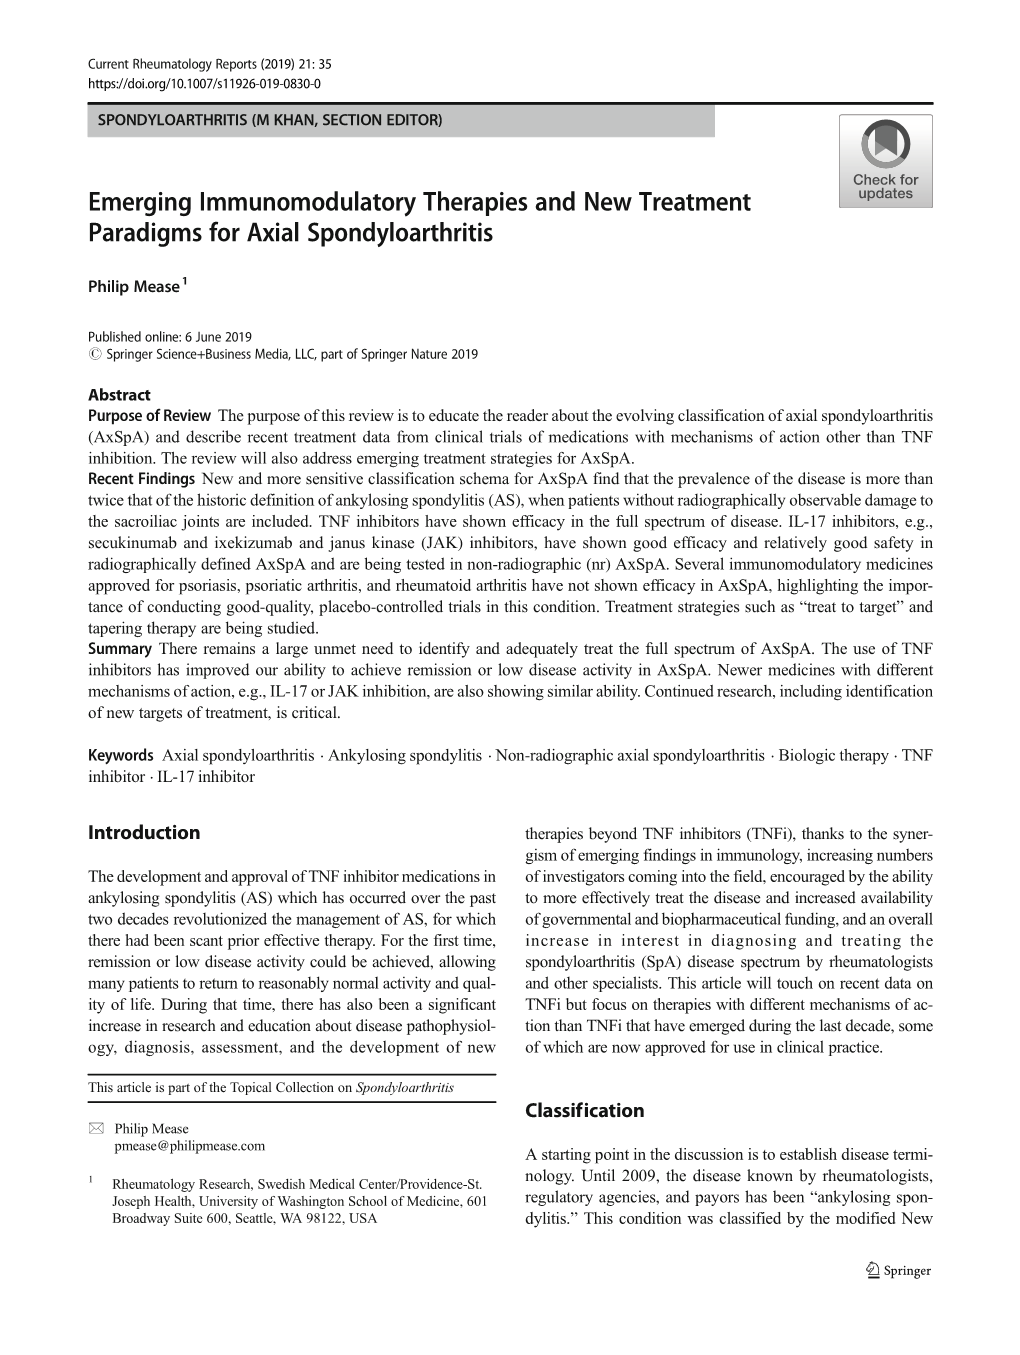 Emerging Immunomodulatory Therapies and New Treatment Paradigms for Axial Spondyloarthritis